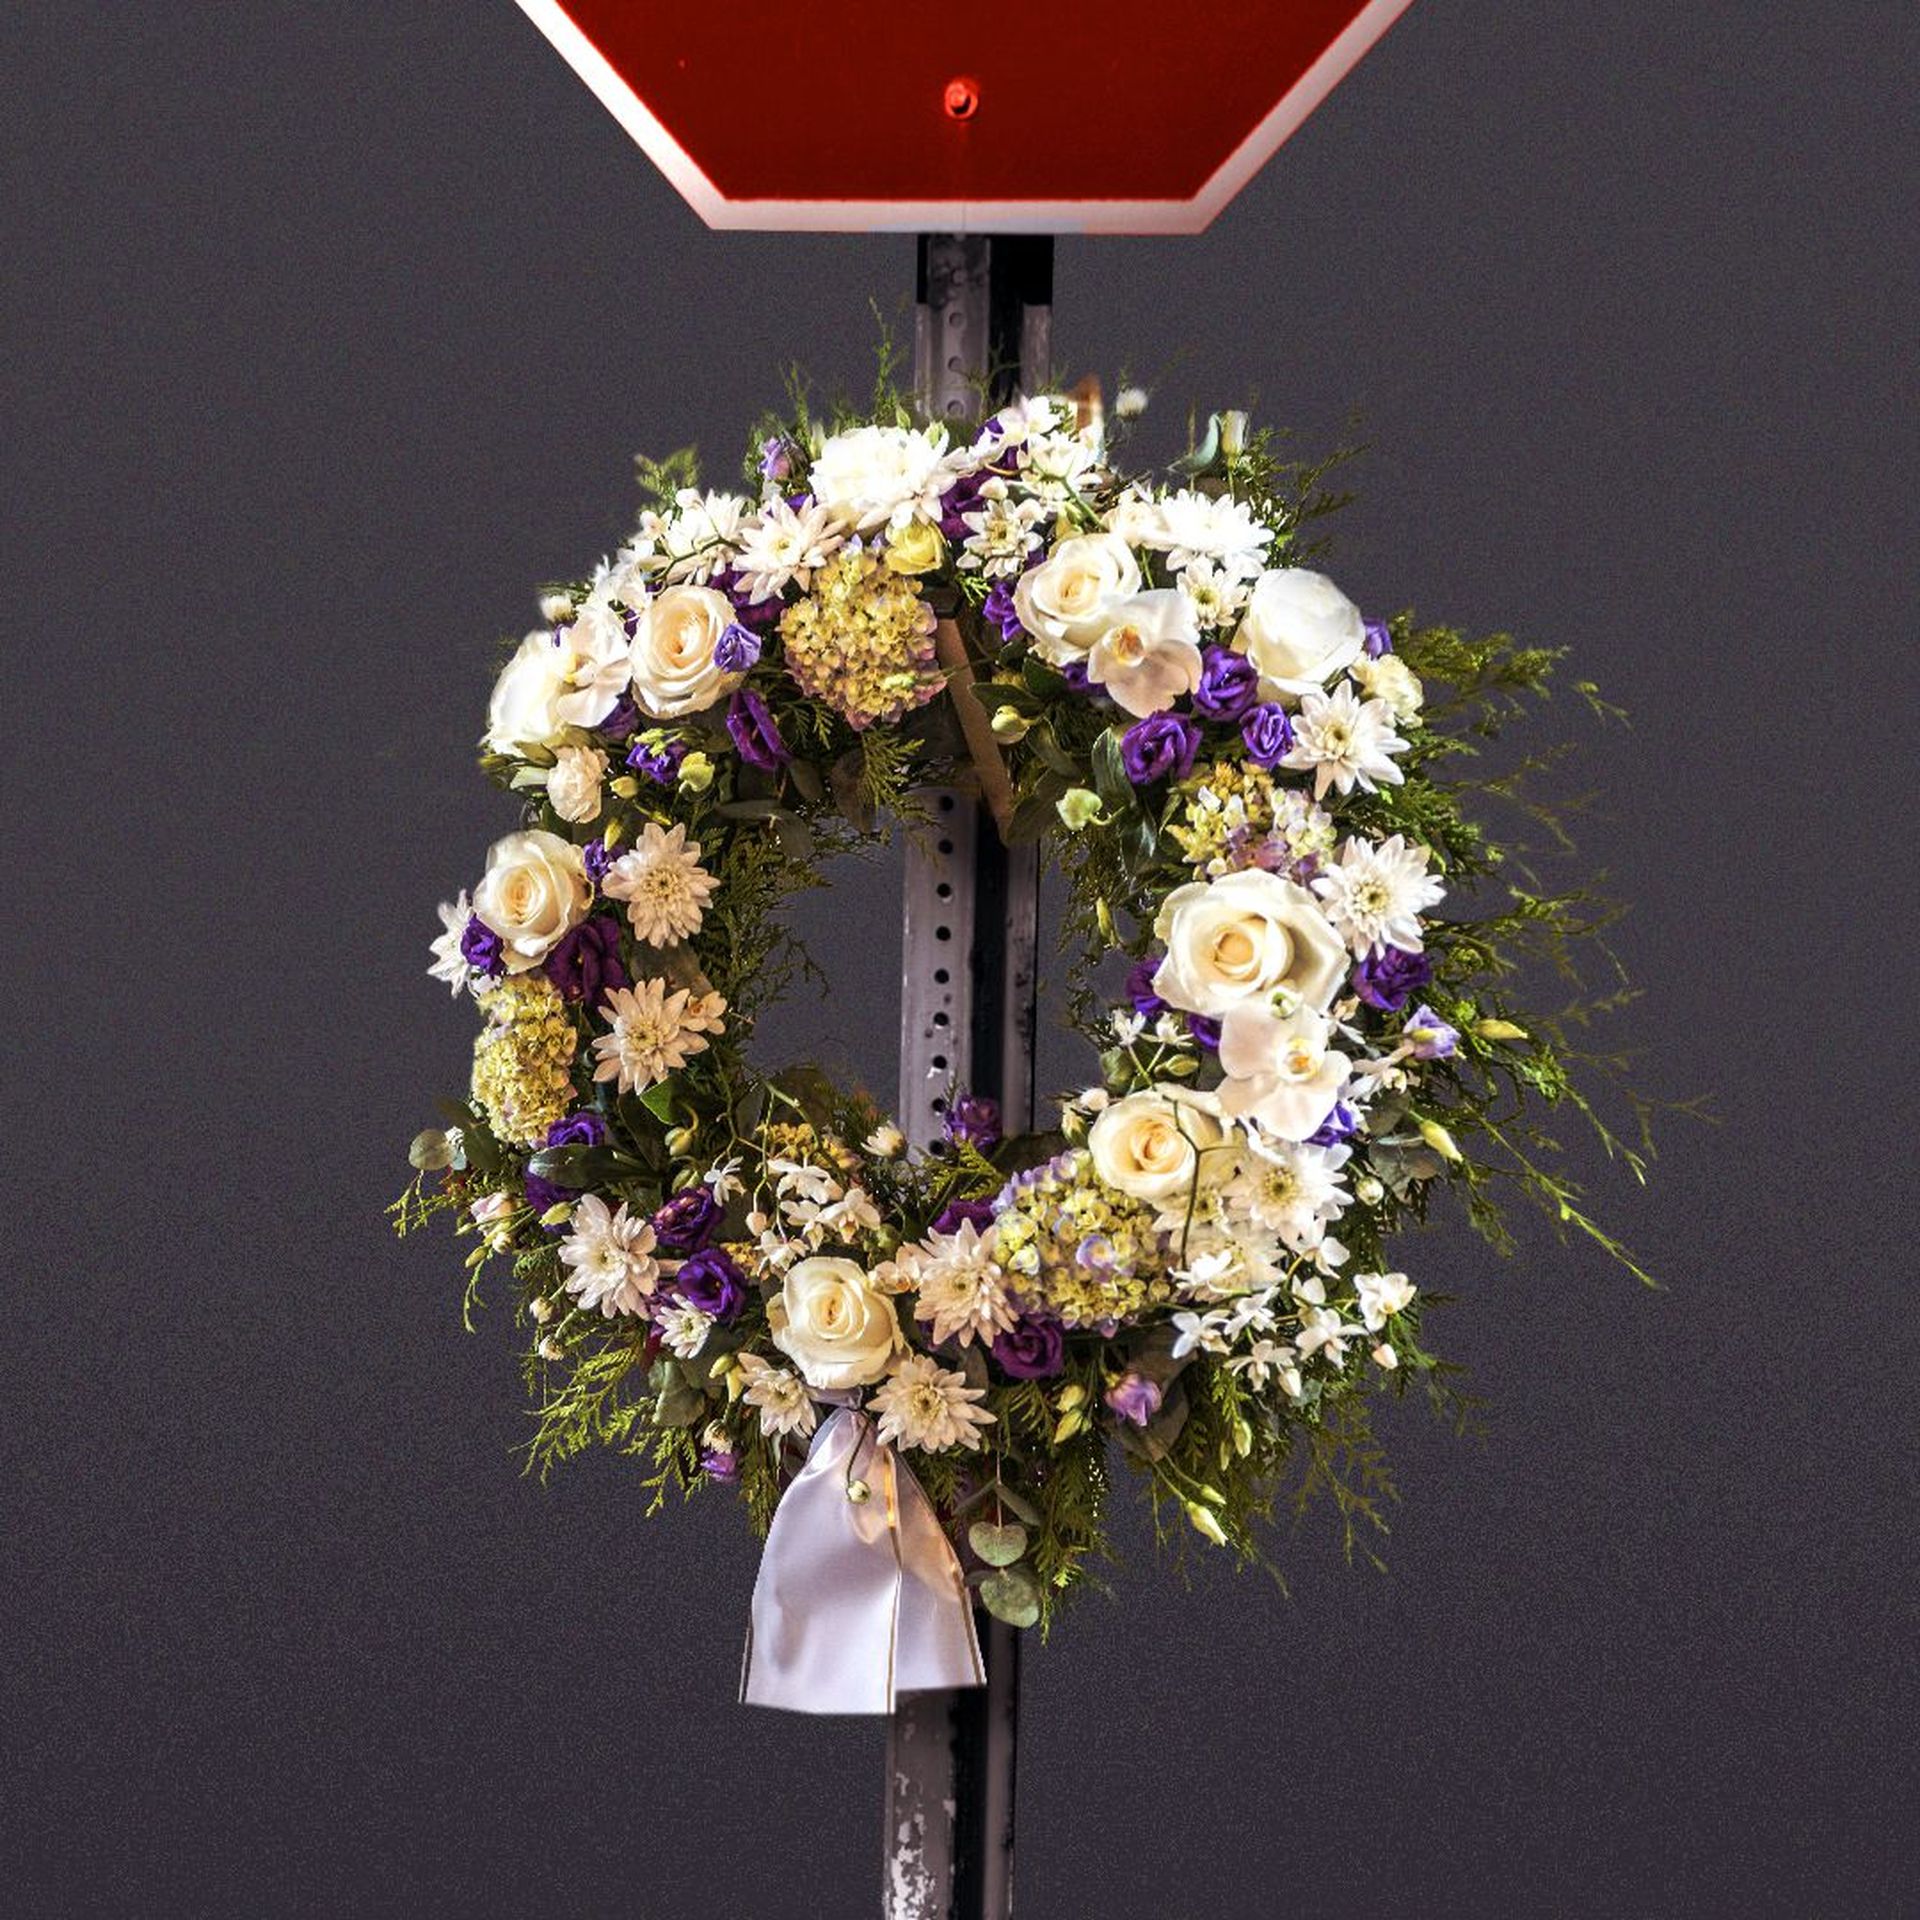 Illustration of a stop sign with a memorial wreath. 